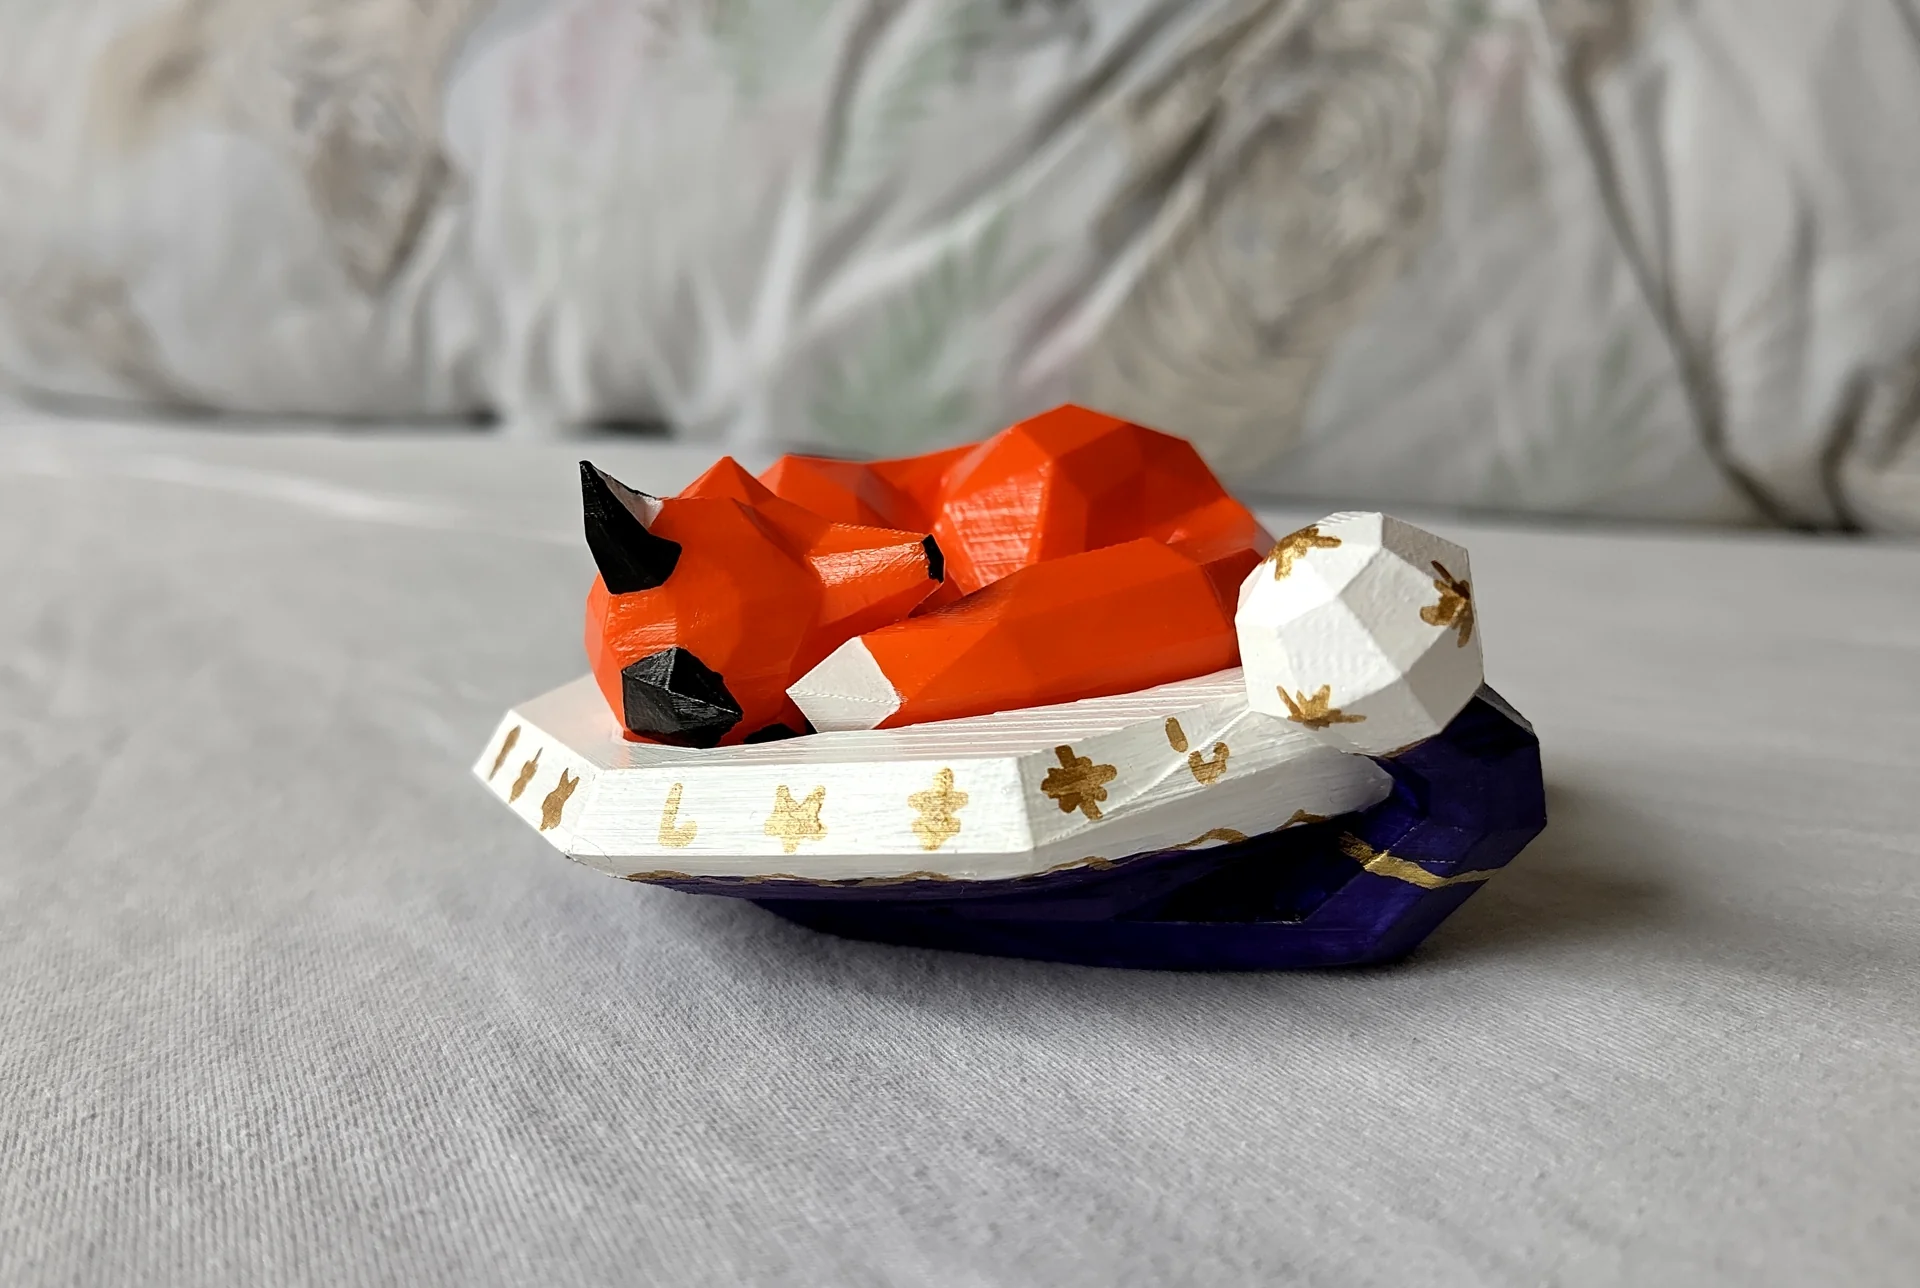 A 3D printed orange fox sleeping in a large purple and white festive hat with golden ornaments.